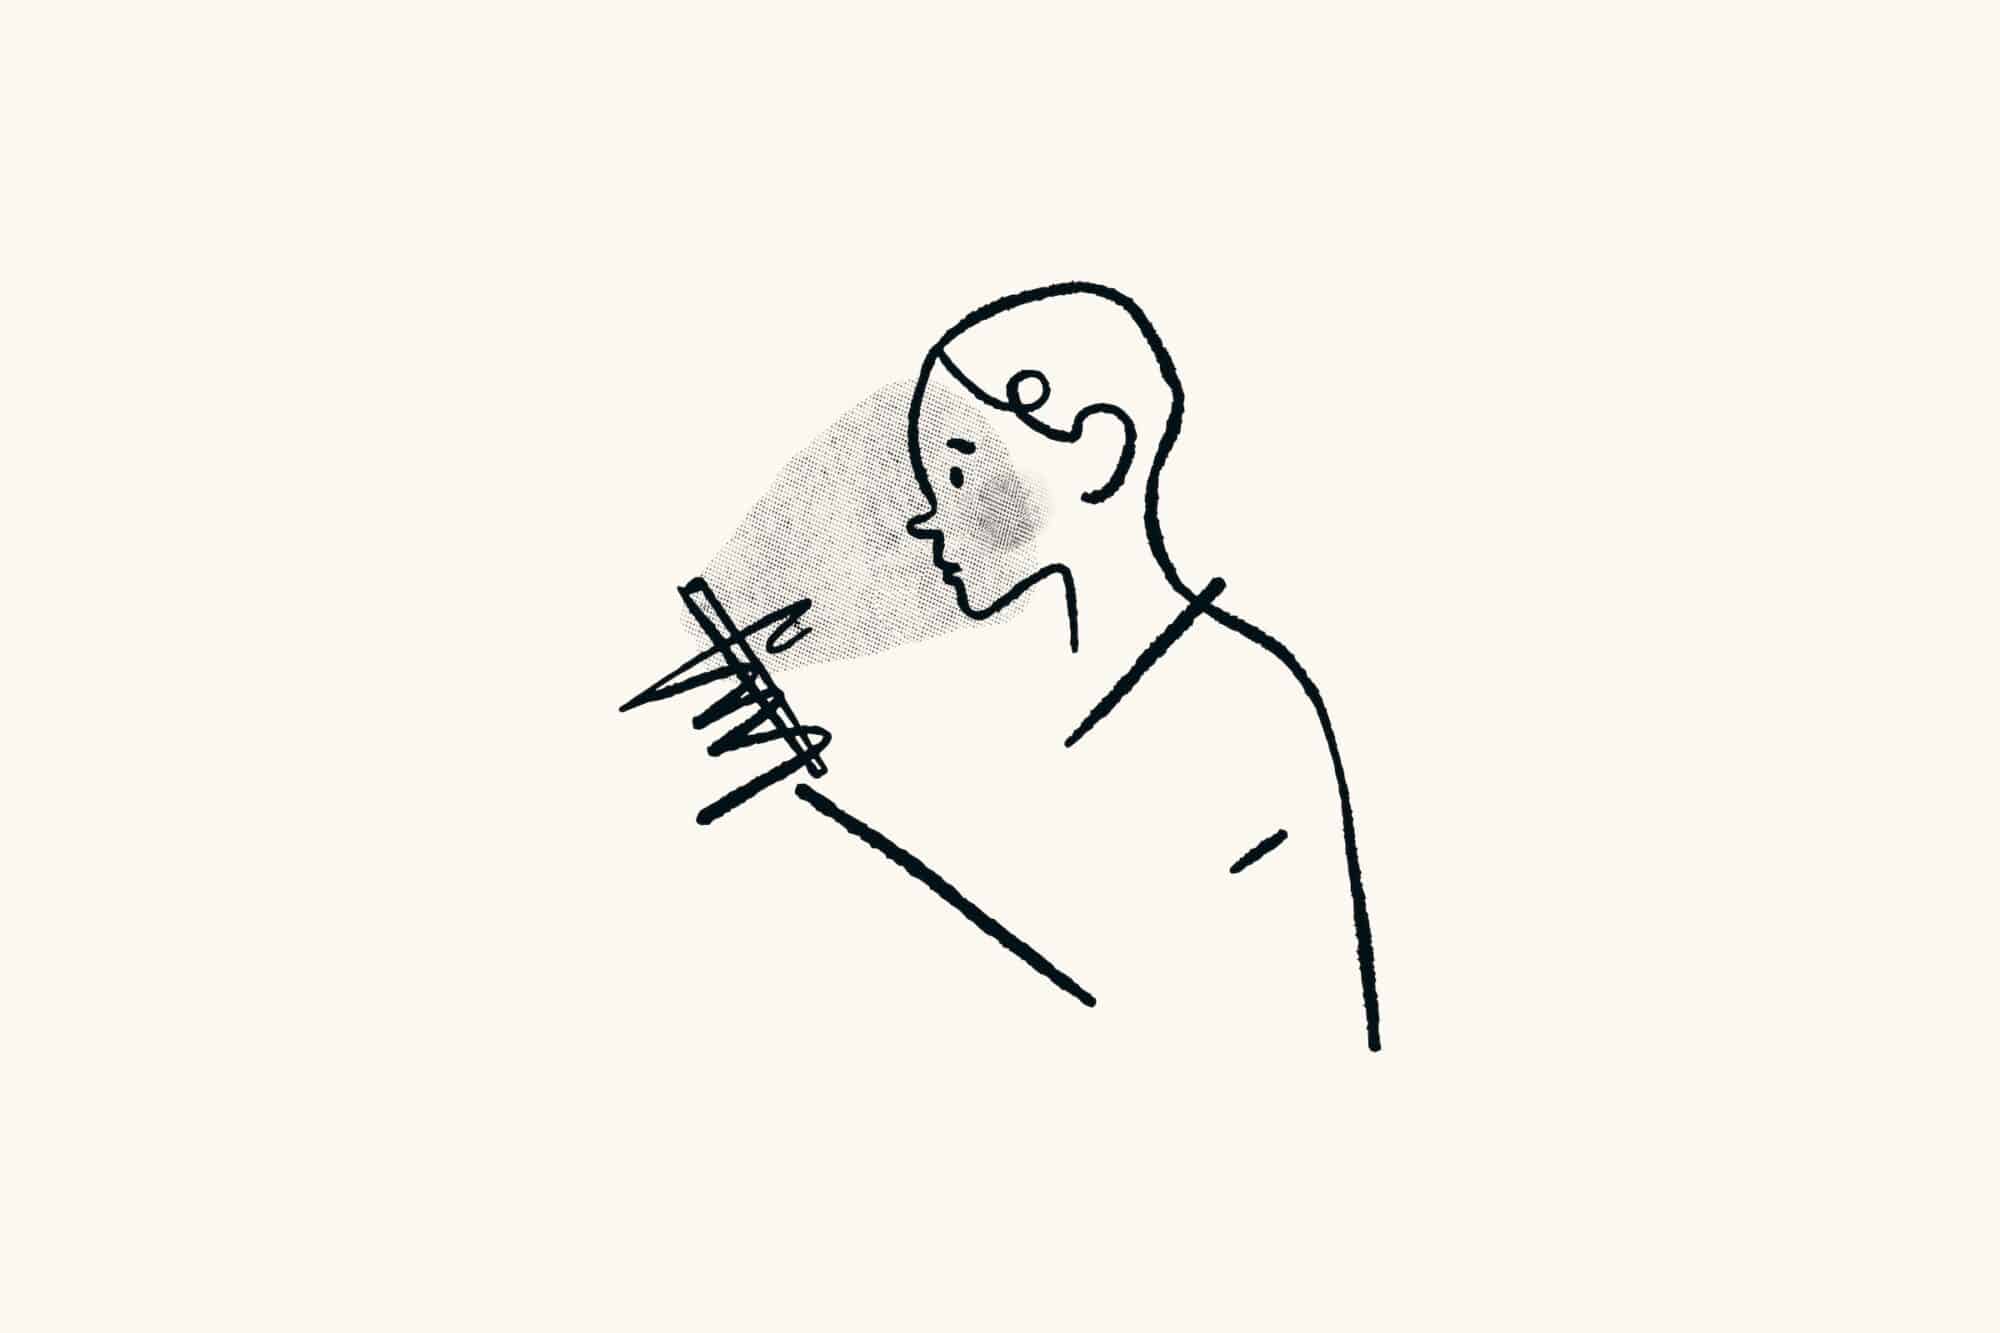 An illustration of a person looking at the screen of their handheld device looking worried.